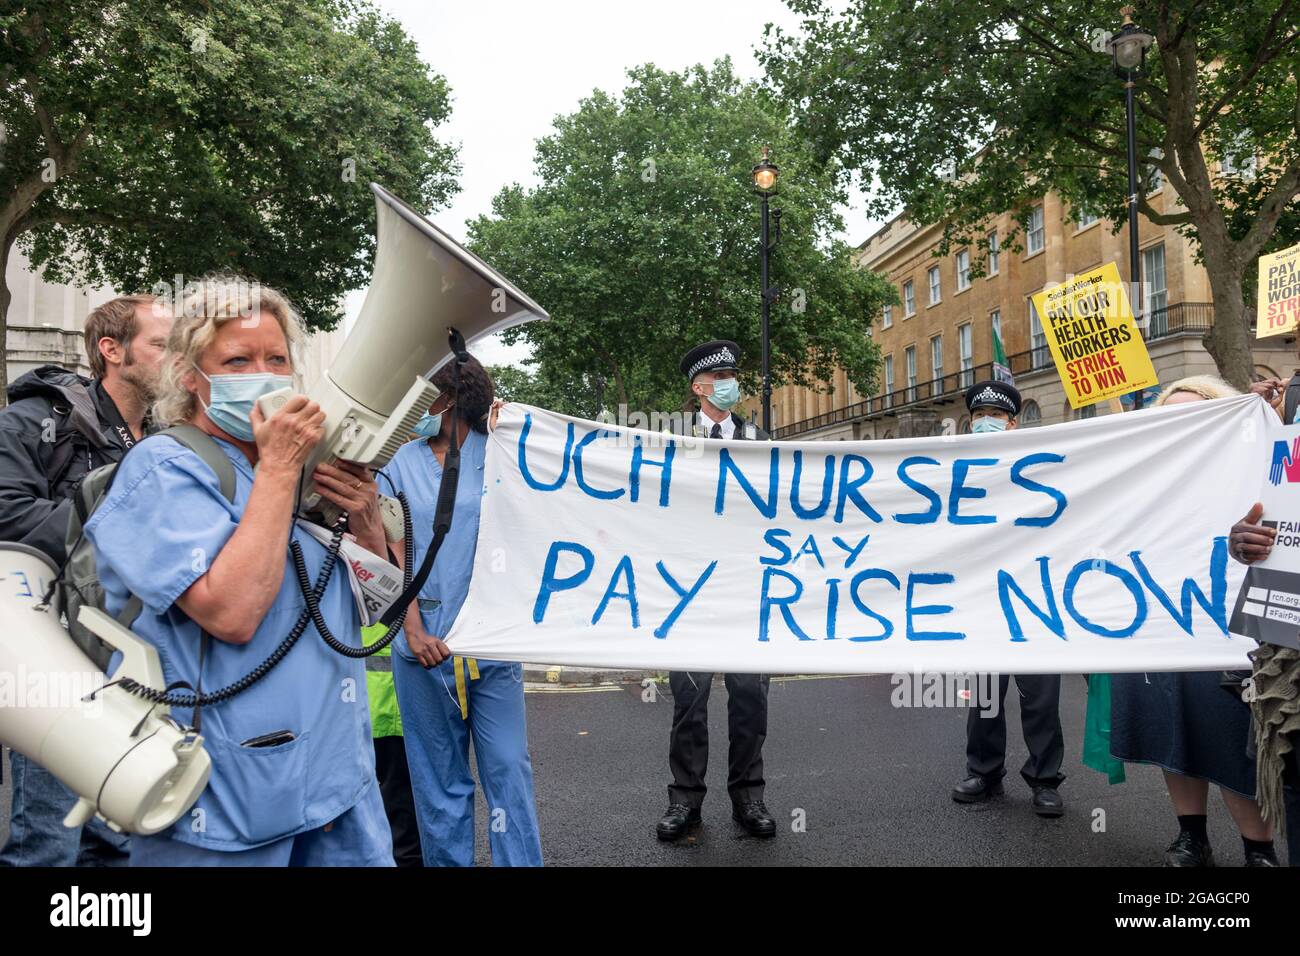 Janet Maiden (L), nurse speaks through a megaphone to other protesters in front of a banner that reads 'UCH Nurses say Pay Rise Now' during a demonstration outside Downing Street.Members of the National Health Service (NHS) gathered outside St. Thomas' Hospital before marching towards Downing Street in a demonstration demanding fair pay for NHS workers, as the government's revised 3% pay rise was deemed hardly satisfactory. Issues addressed included long working hours, understaff and a lack of proper protection materials for the health workers. The demonstration was was led by NHS Workers Say Stock Photo